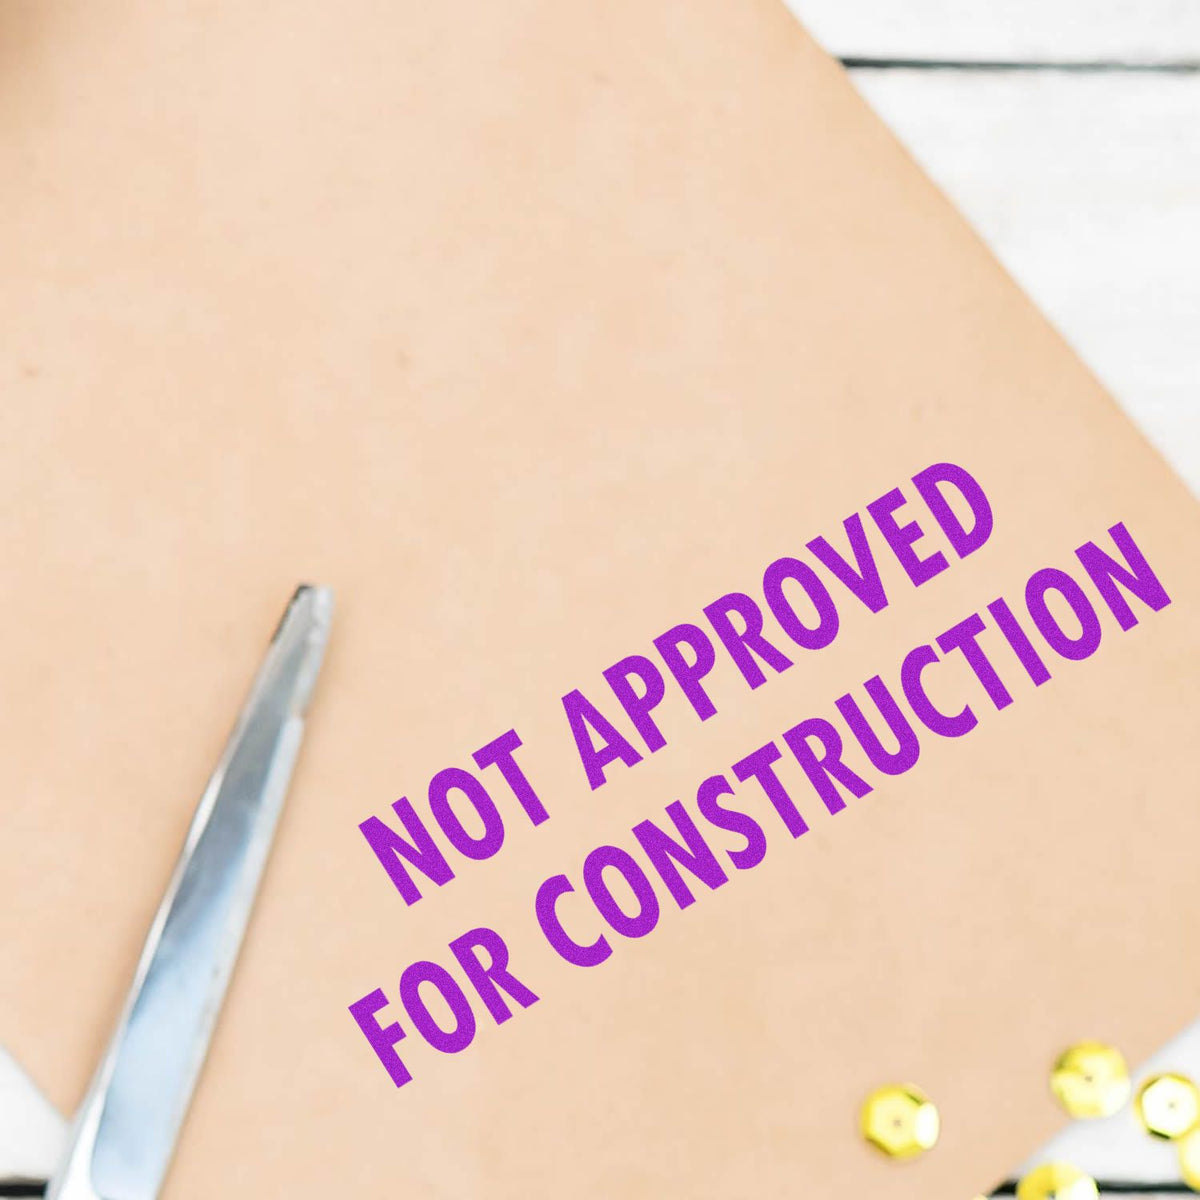 Large Not Approved For Construction Rubber Stamp In Use